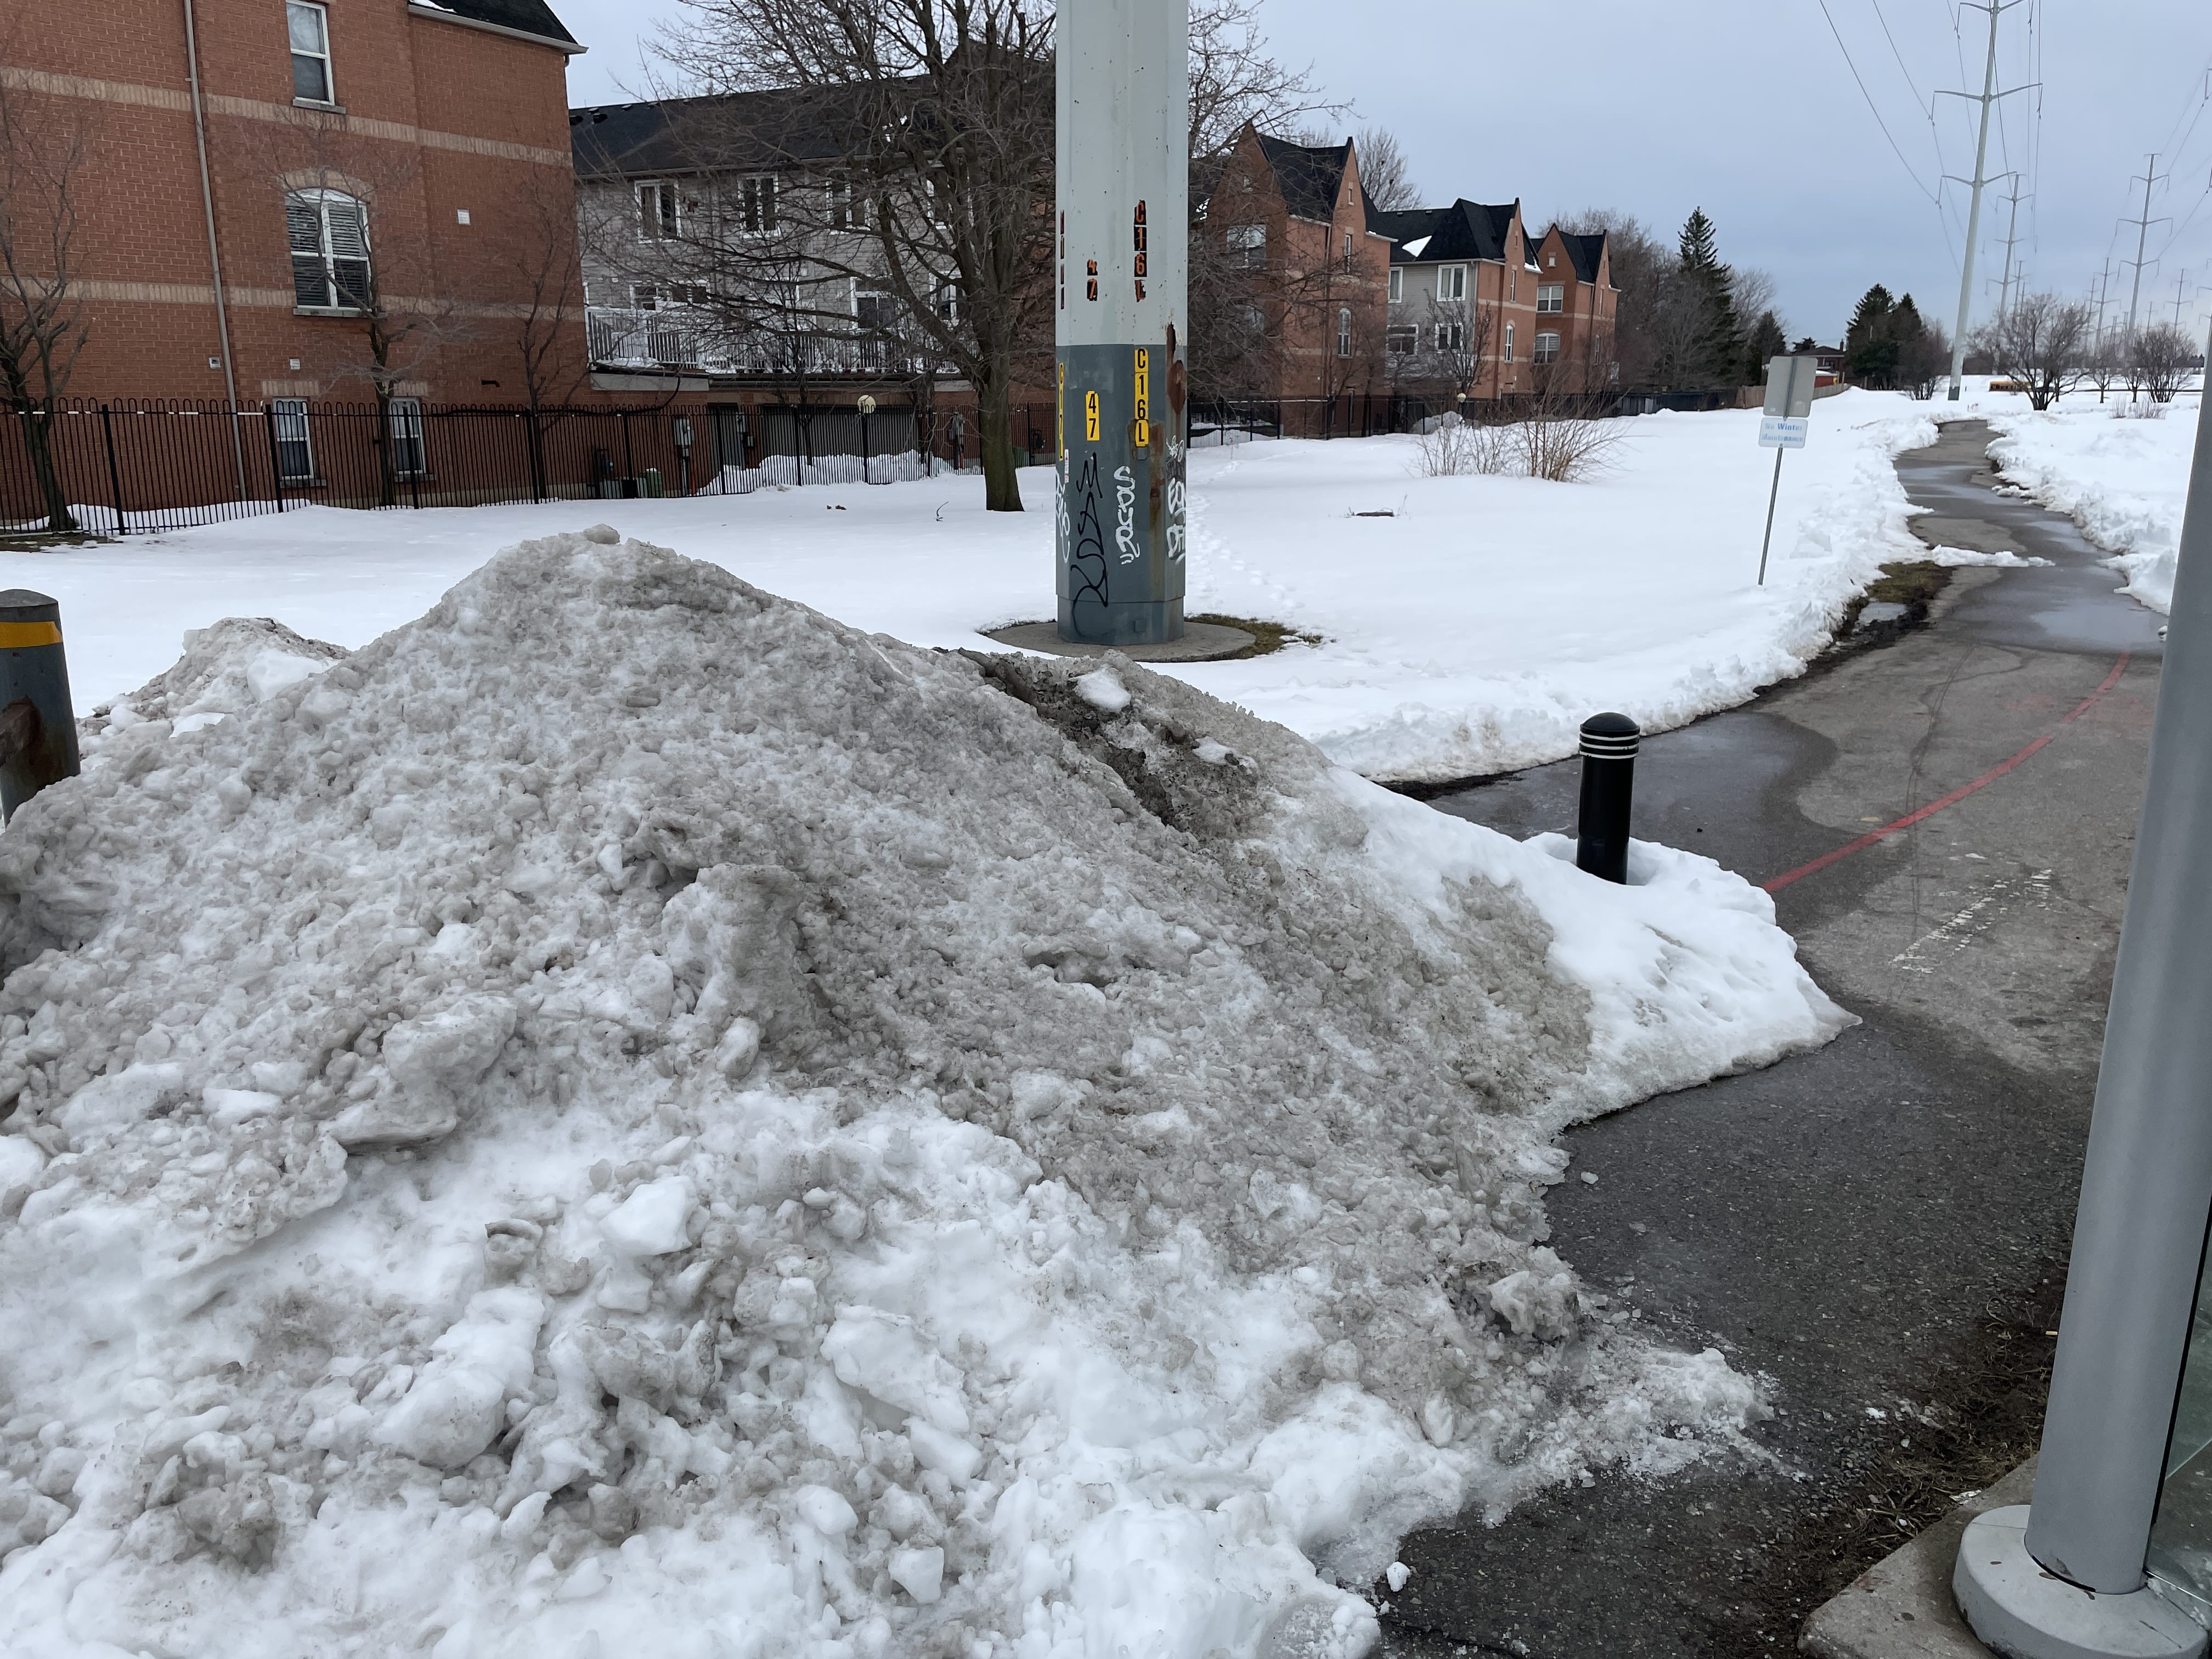 Photo of a trail entrance from Lawrence Ave E, with a pile of dirty snow about 1.5 metres tall and 4 metres wide. The passable gap between the pile of snow and a bus shelter is about half a metre wide. Power lines and houses are visible in the background.